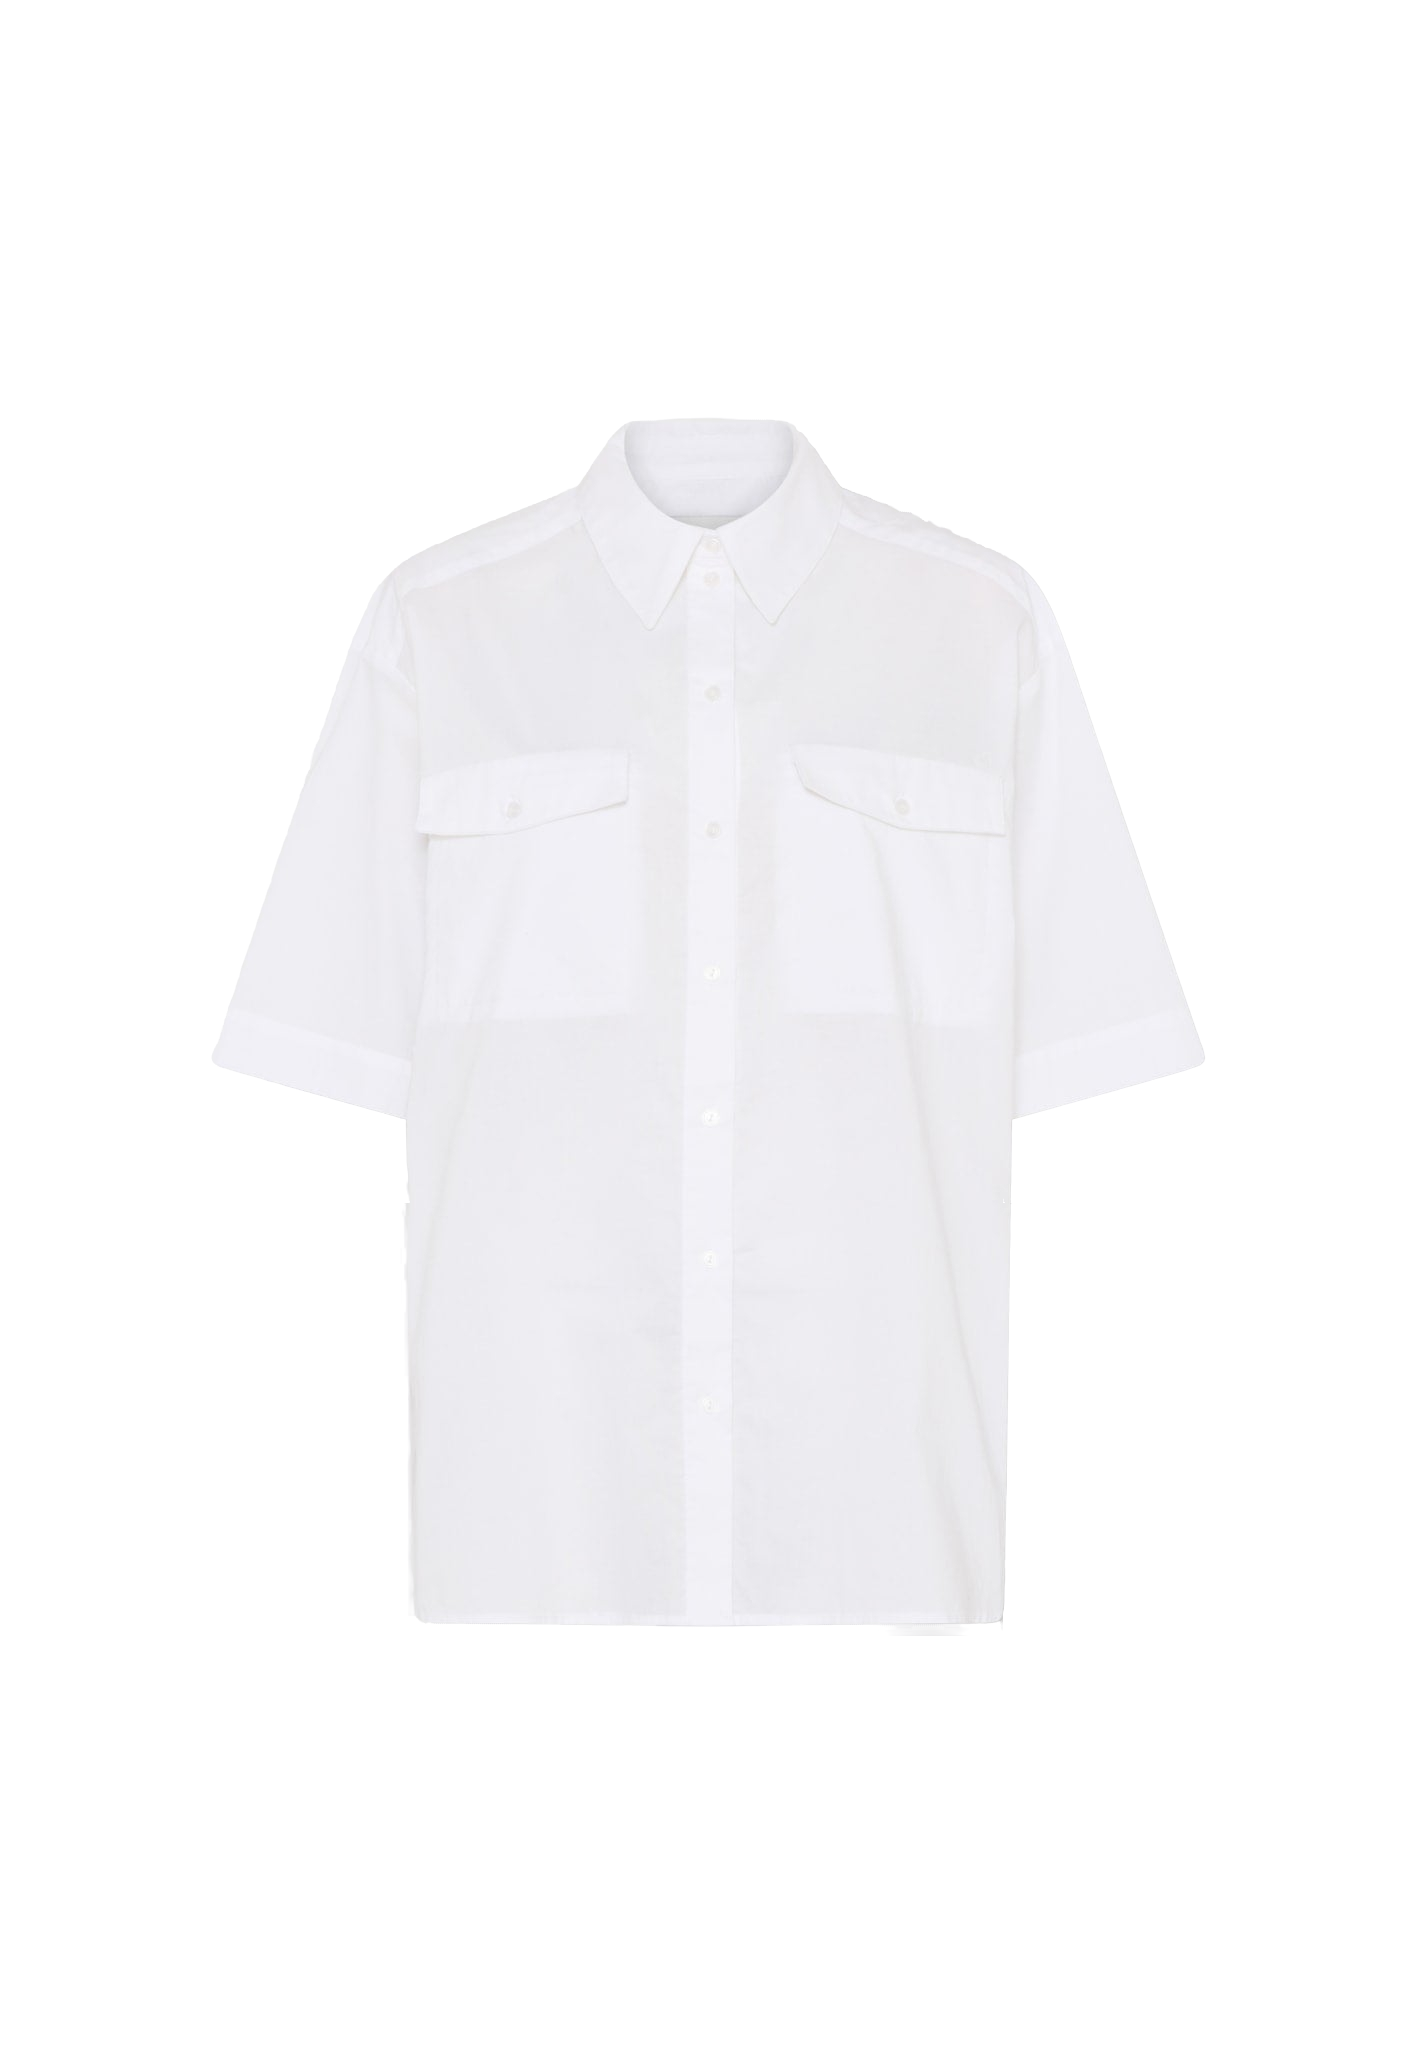 Herskind Helle Shirt In White